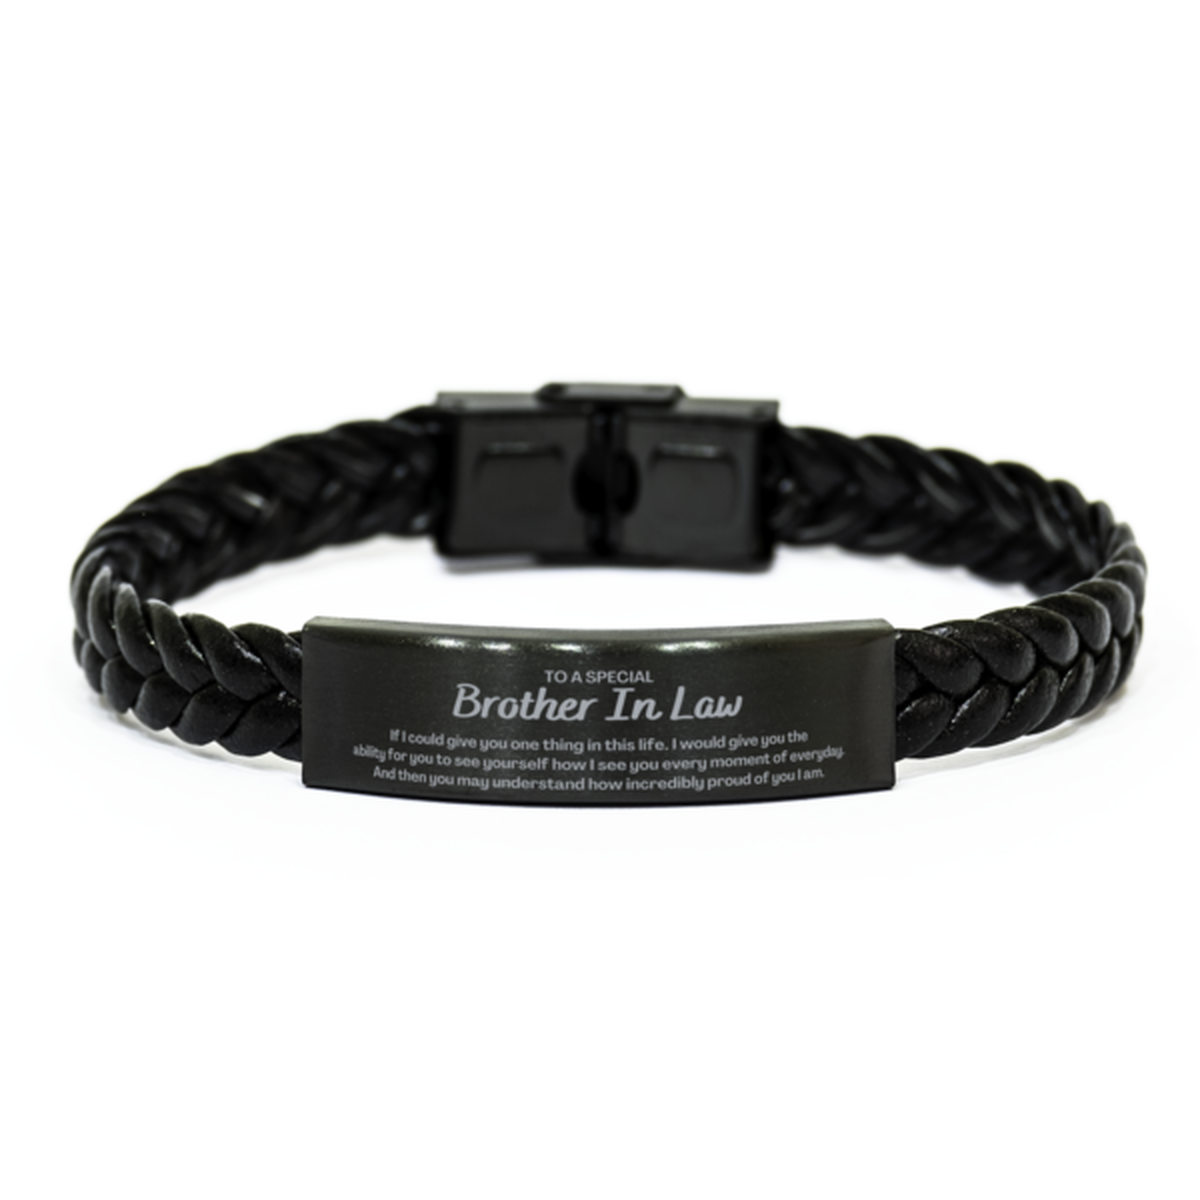 To My Brother In Law Braided Leather Bracelet, Gifts For Brother In Law Engraved, Inspirational Gifts for Christmas Birthday, Epic Gifts for Brother In Law To A Special Brother In Law how incredibly proud of you I am